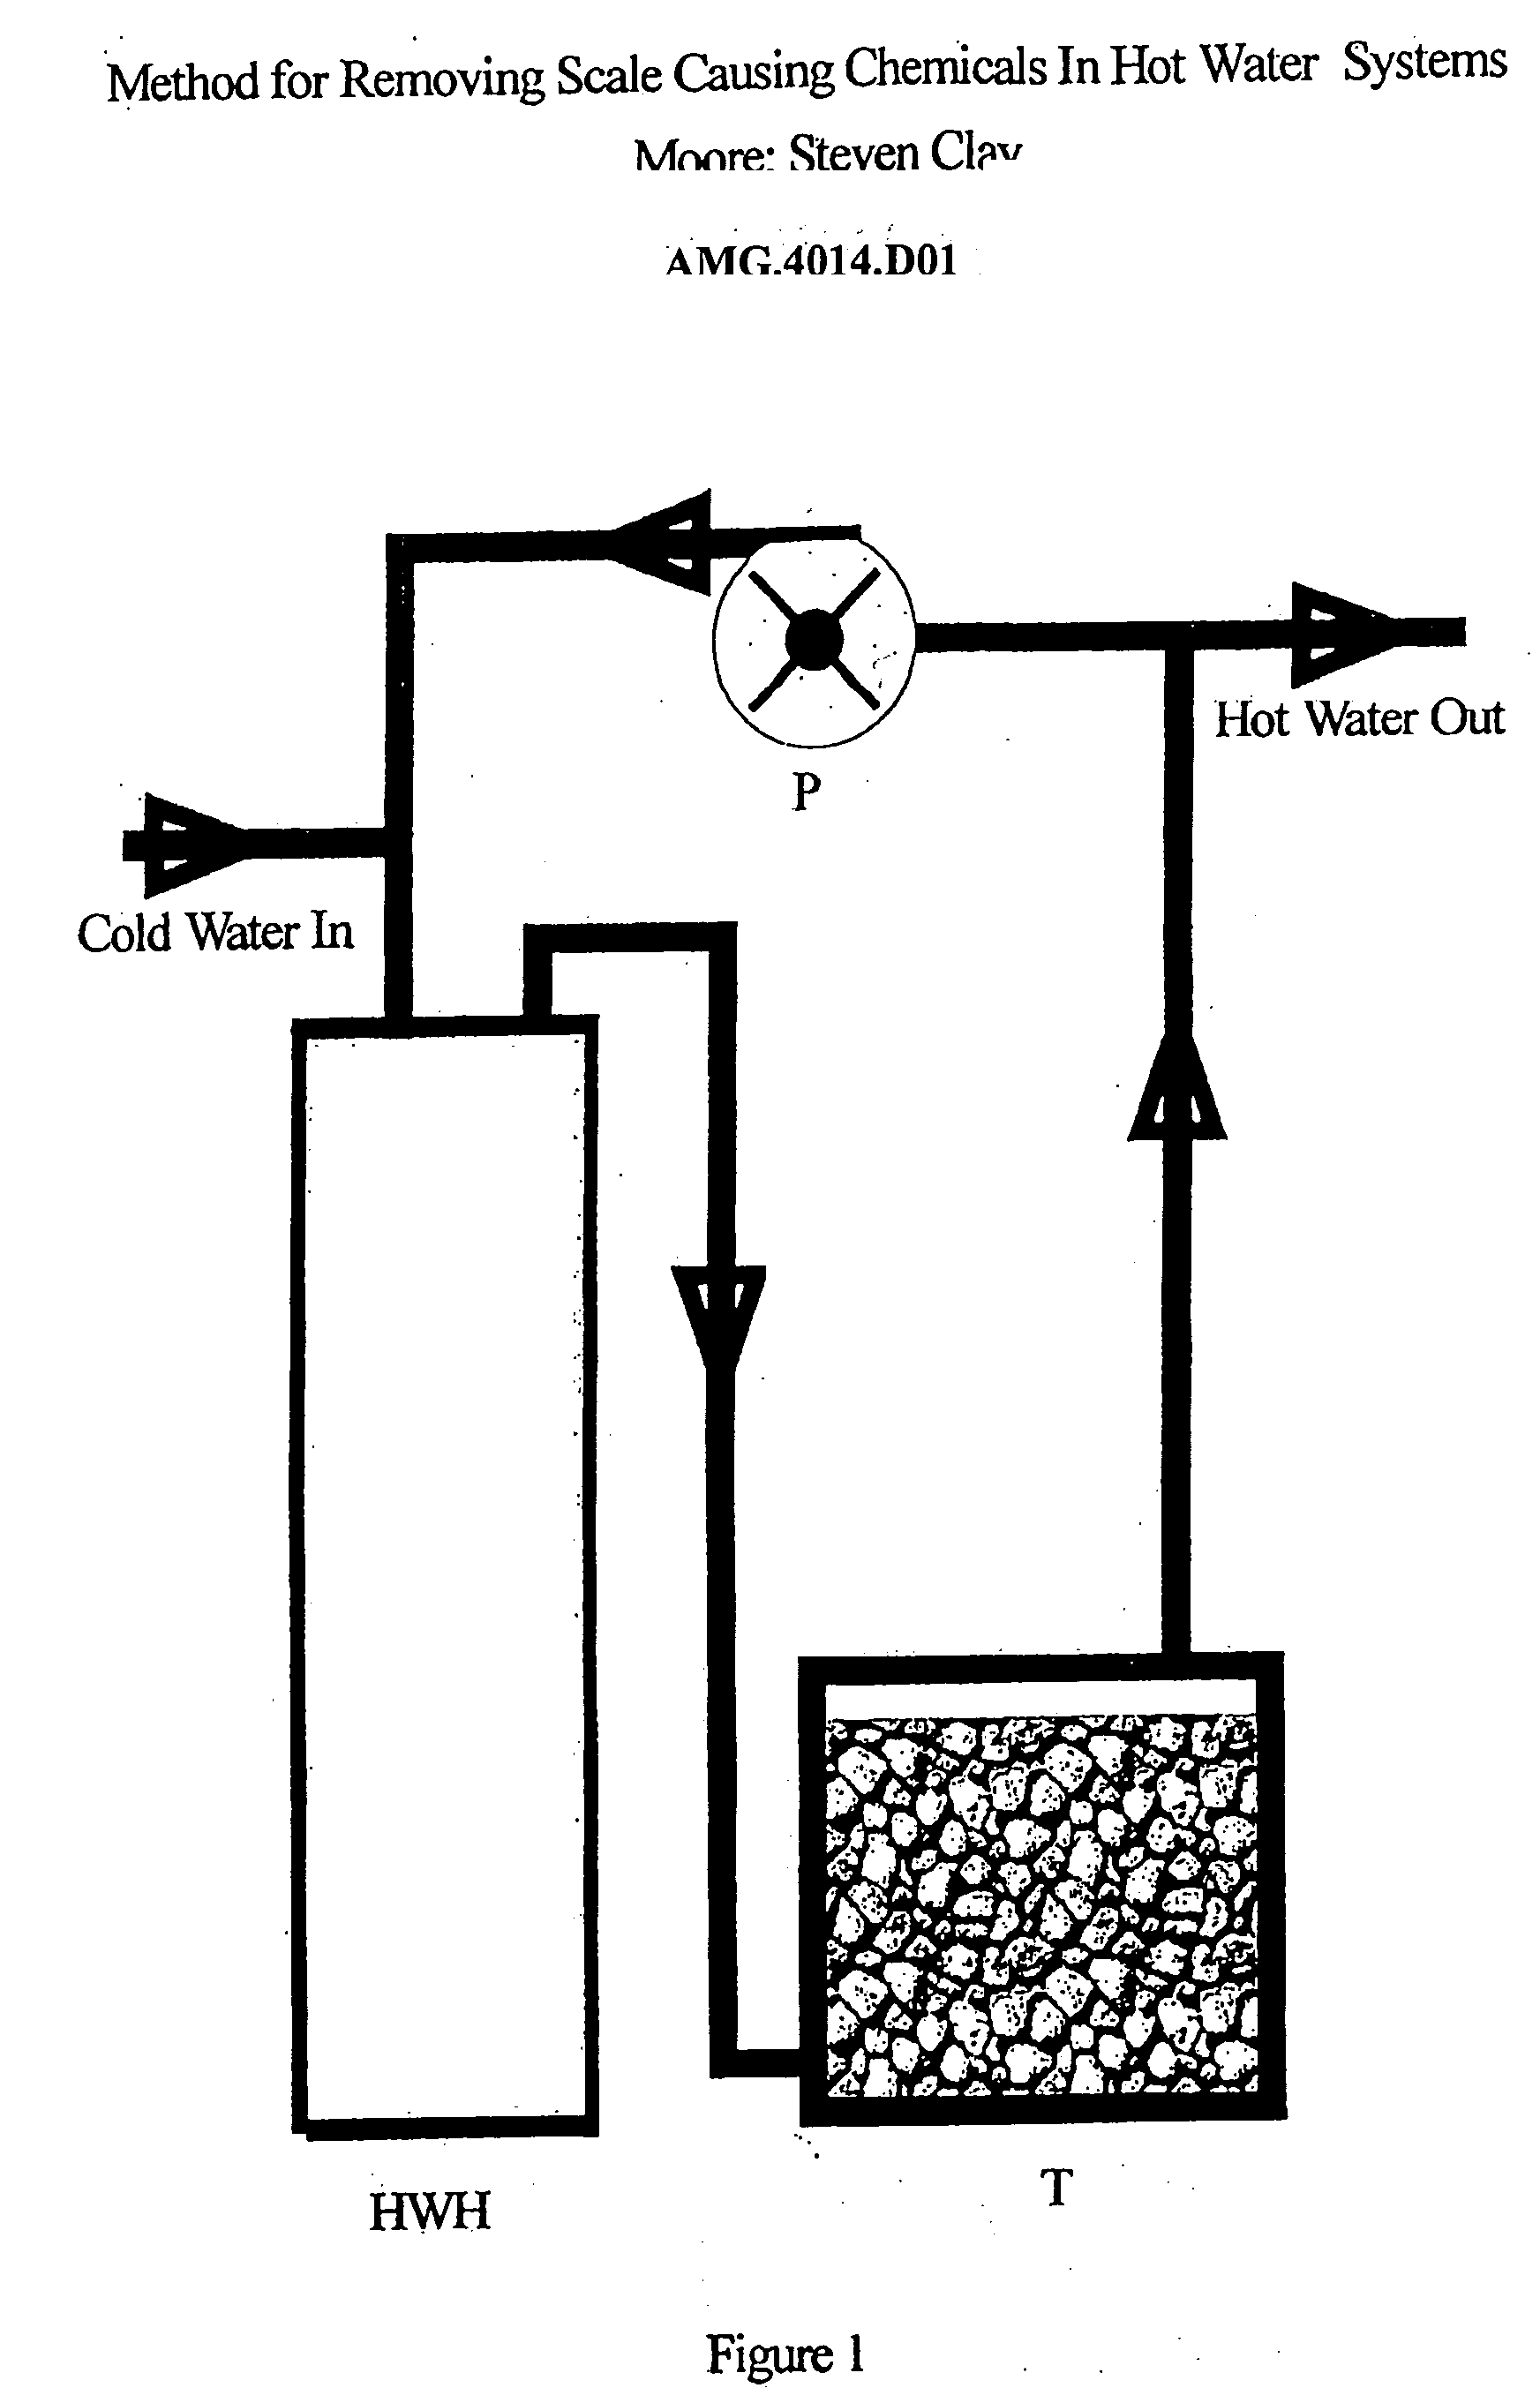 Method for removing scale causing chemicals in hot water systems